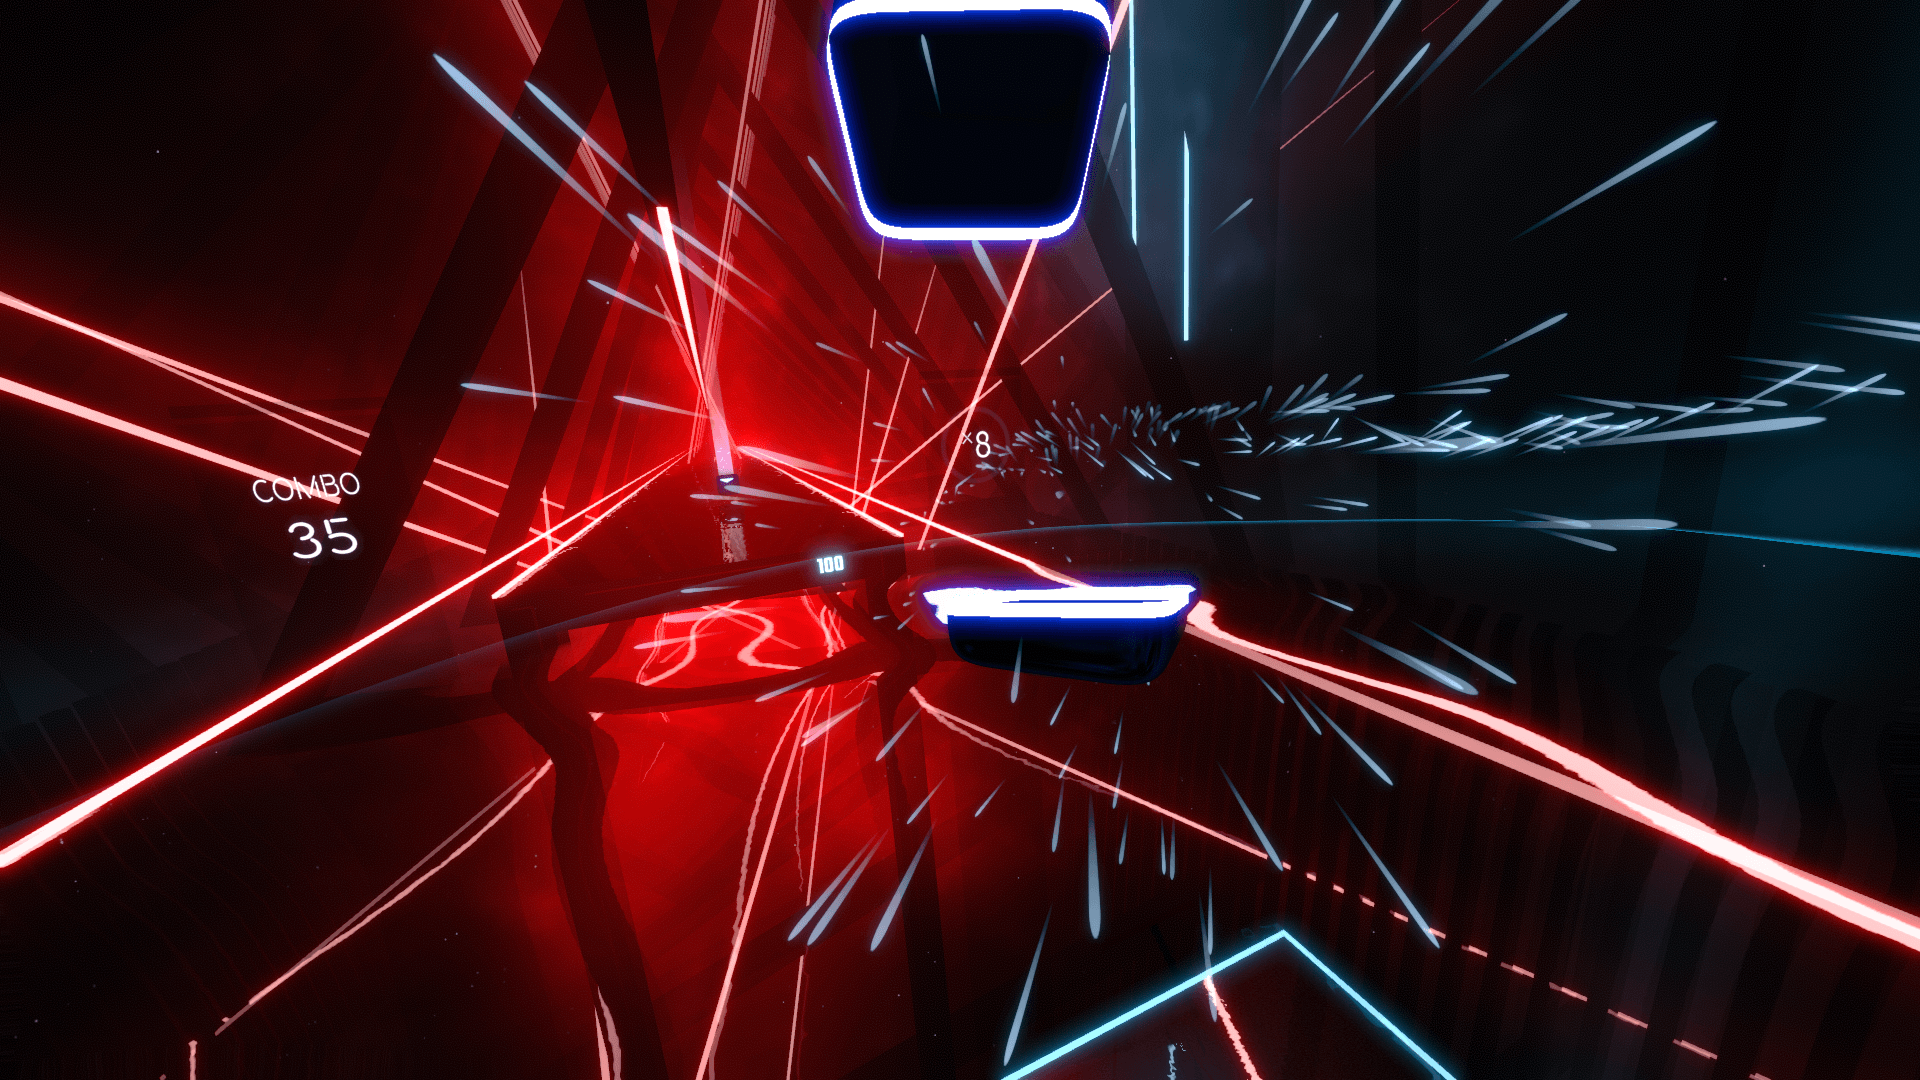 Beat Saber will debut on the Oculus Quest headset